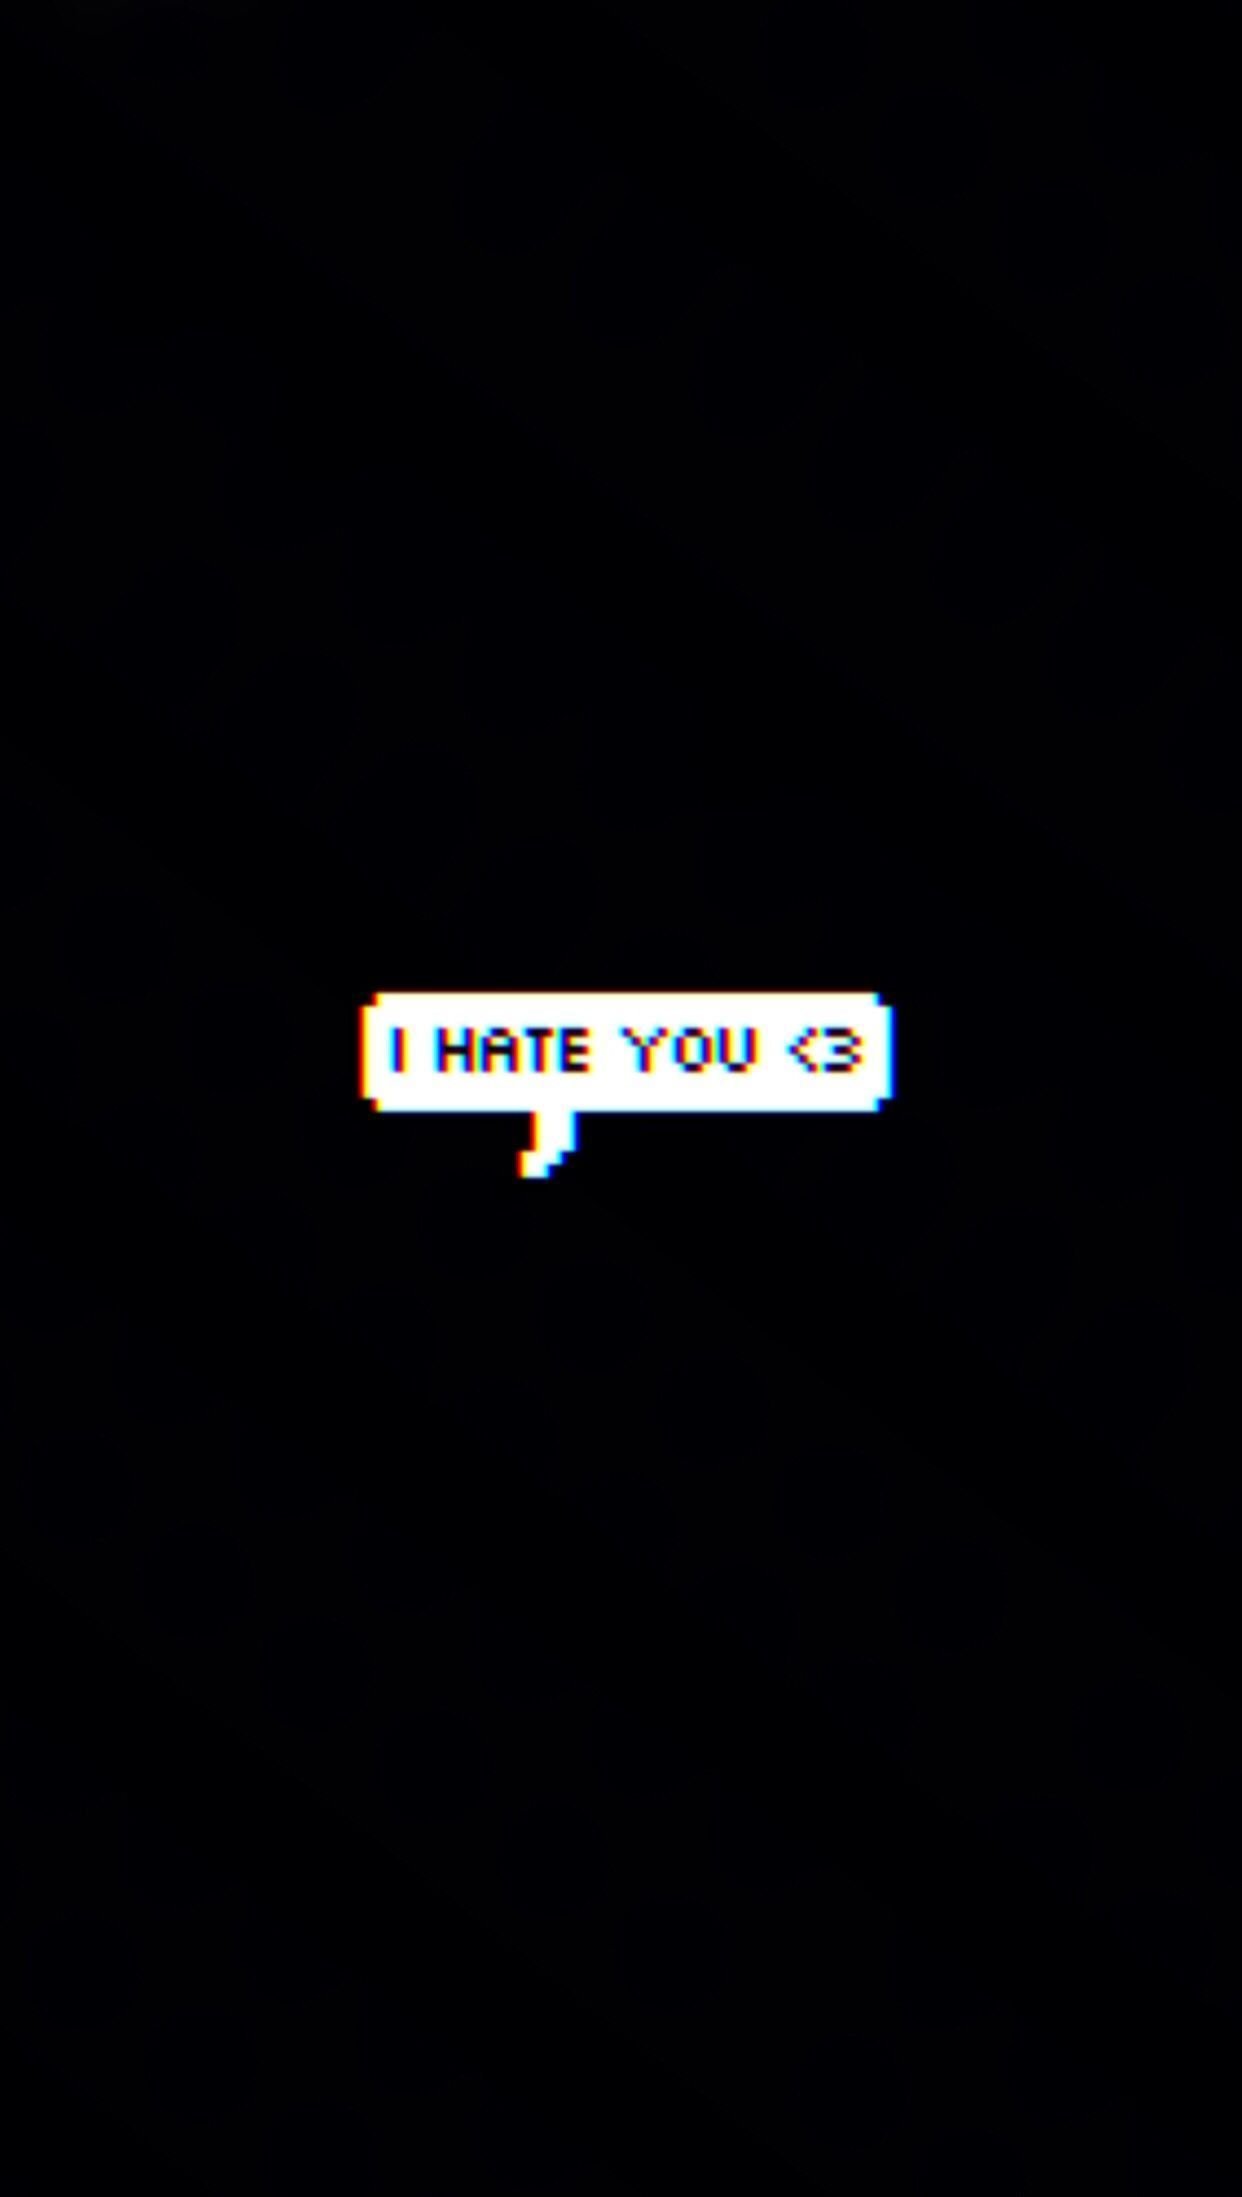 Best 5 Hate My Life on Hip, hate my life iphone HD phone wallpaper | Pxfuel